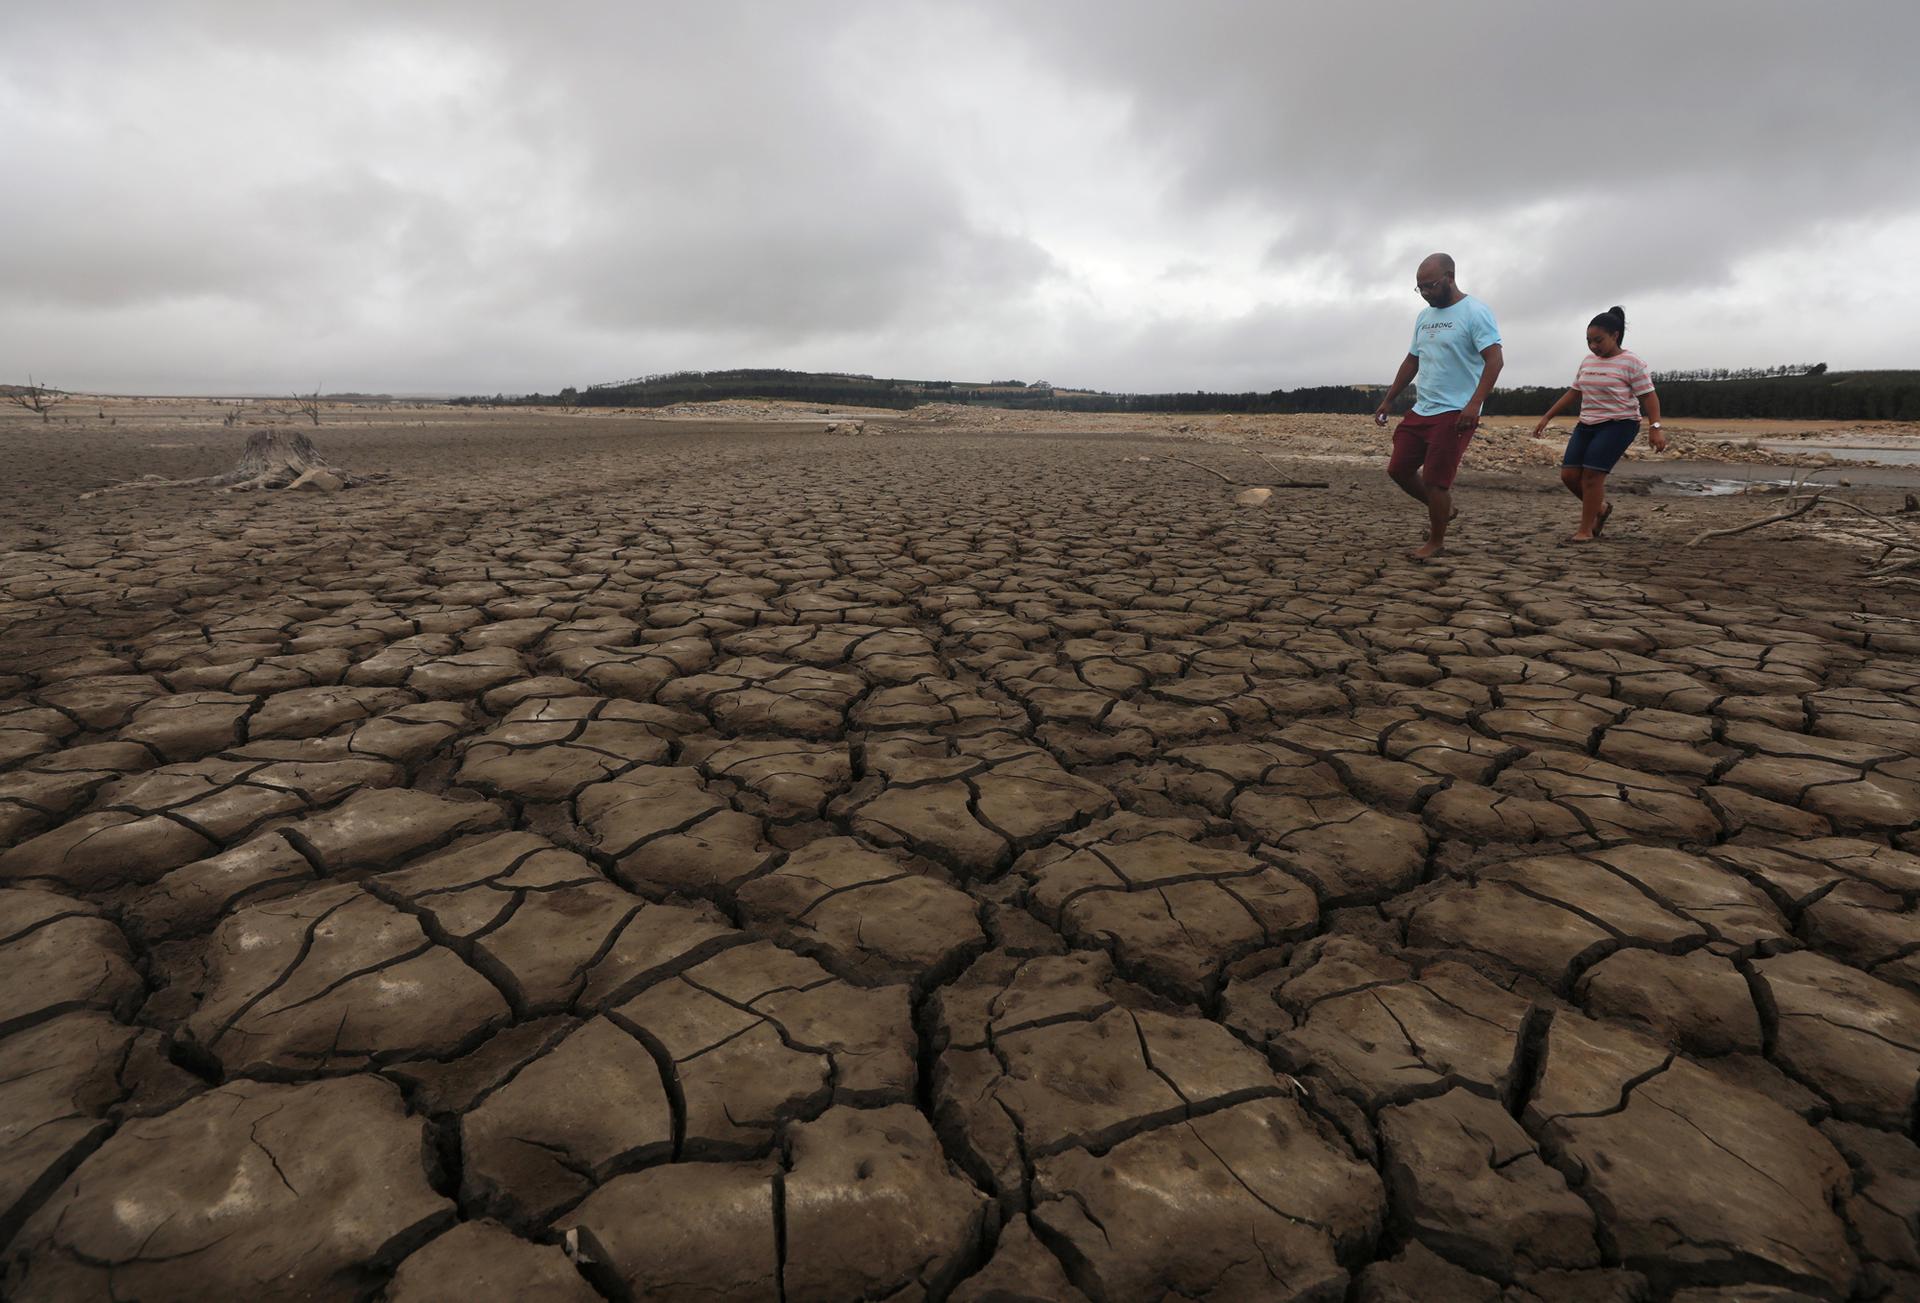 A family negotiates their way through caked mud around a dried up section of the Theewaterskloof dam near Cape Town.